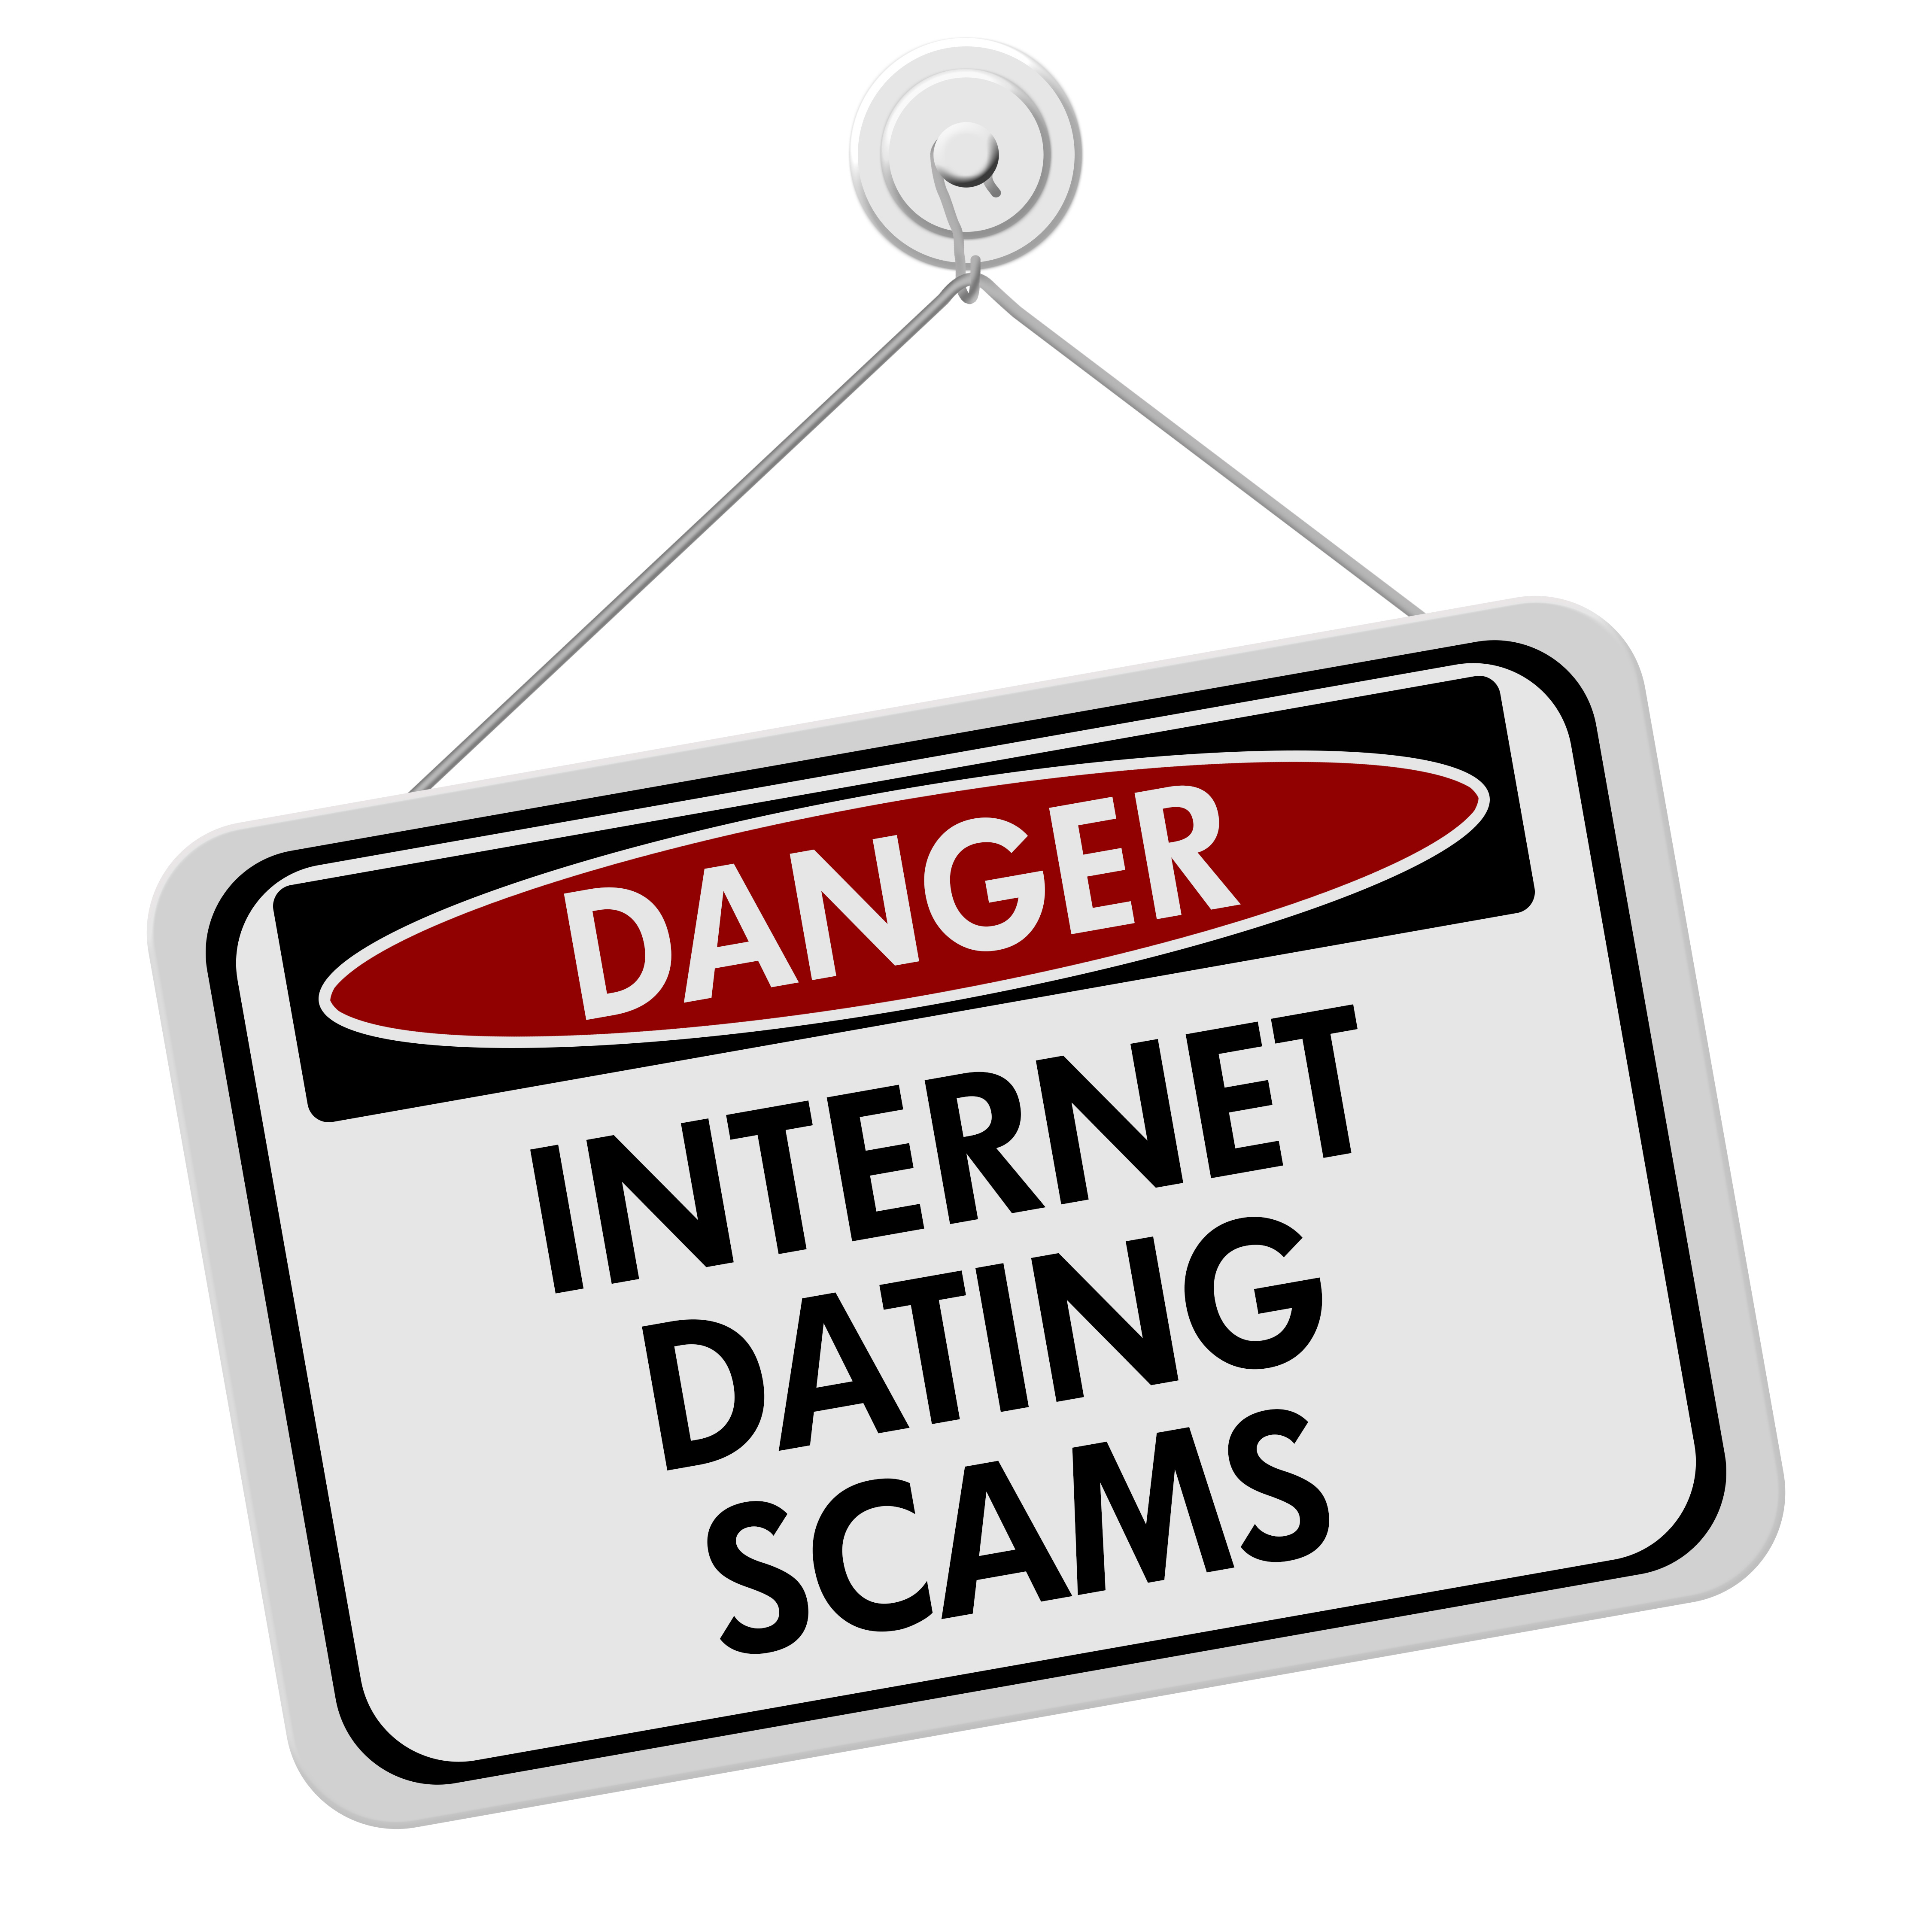 Be aware of online dating scams | Kingman Daily Miner ...